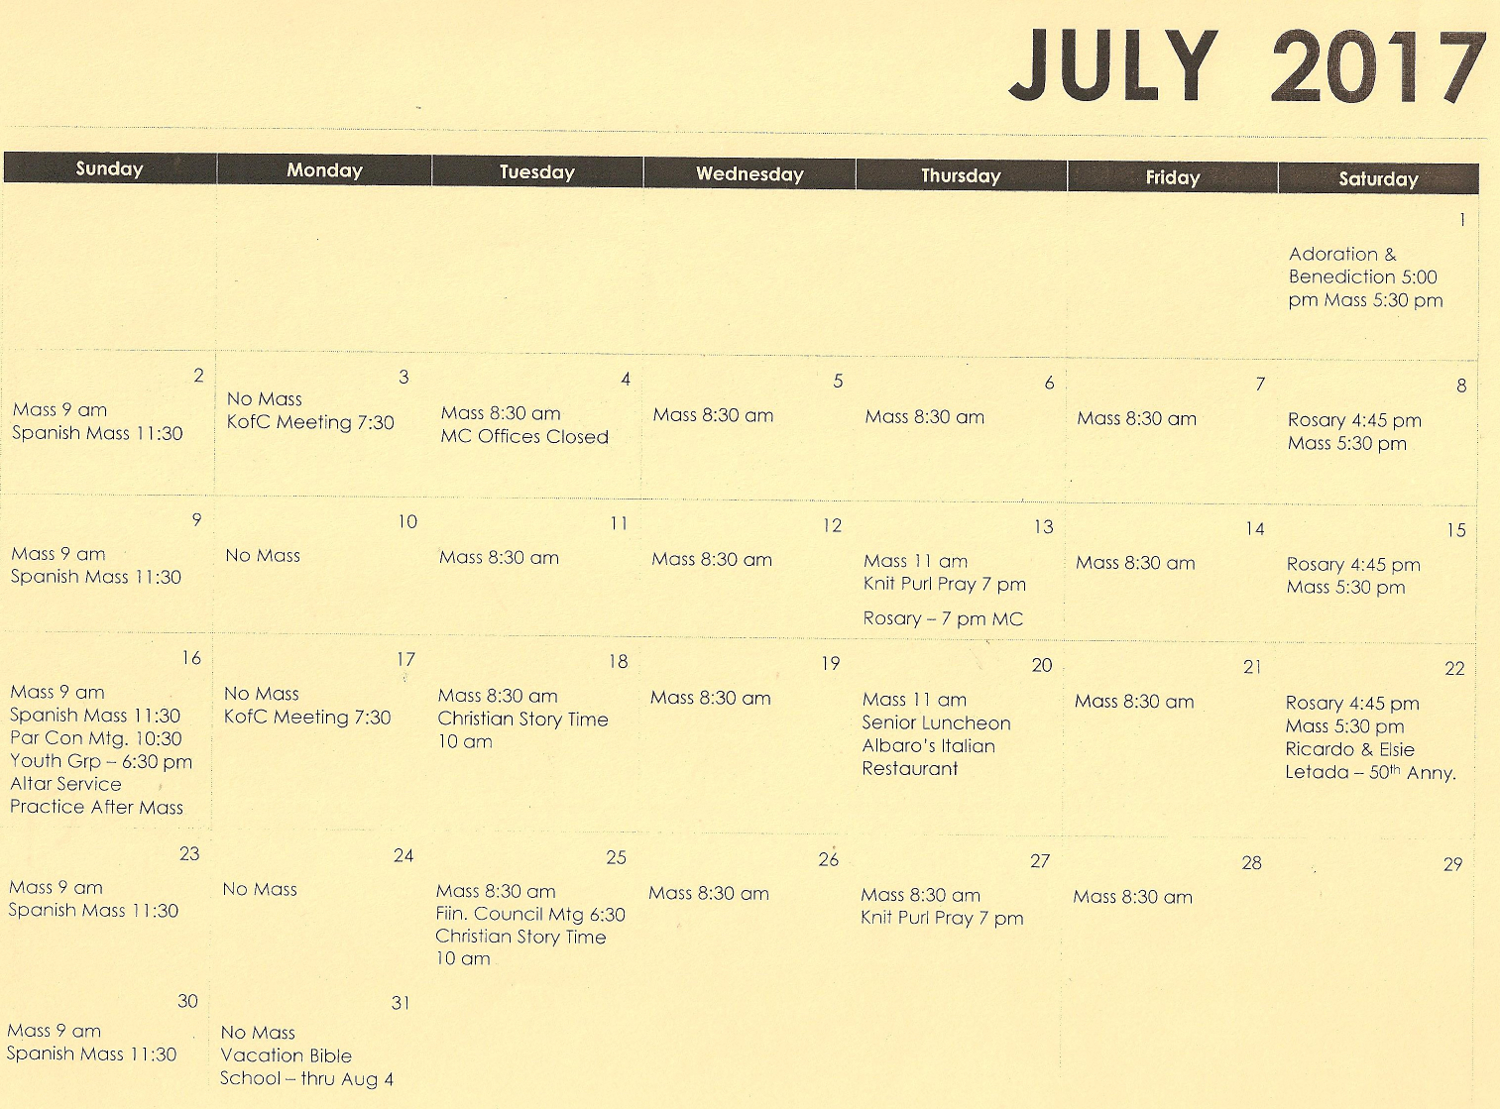 July 2017 Calendar Our Lady of the Blessed Sacrament Catholic Church